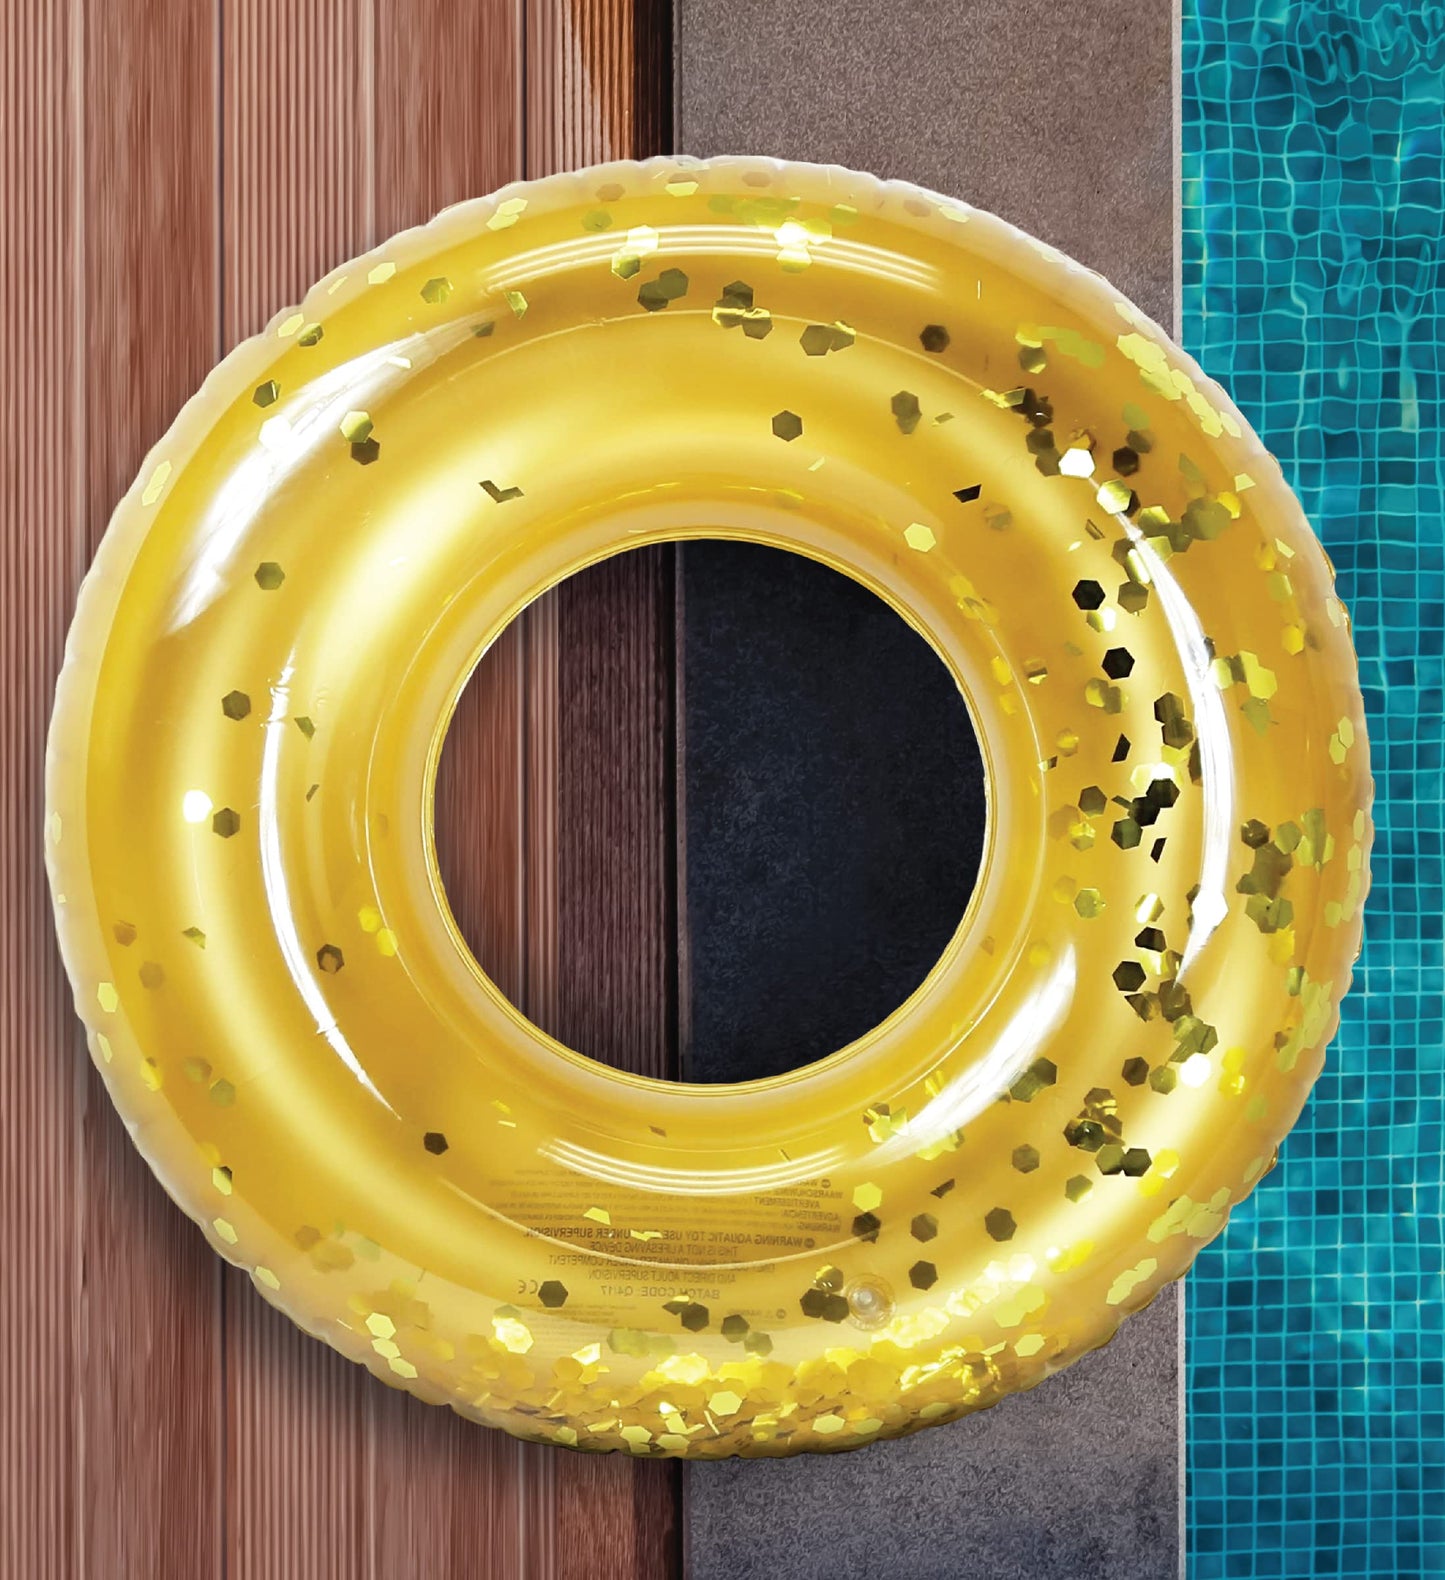 CoTa Global Inflatable Pool Float Tube Confetti 36 Inches Premium Swim Ring Heavy Duty Vinyl Flotation Pool Floats Toy for The Beach, Party, Vacation, UV Resistant - Pool Party Gold 36"